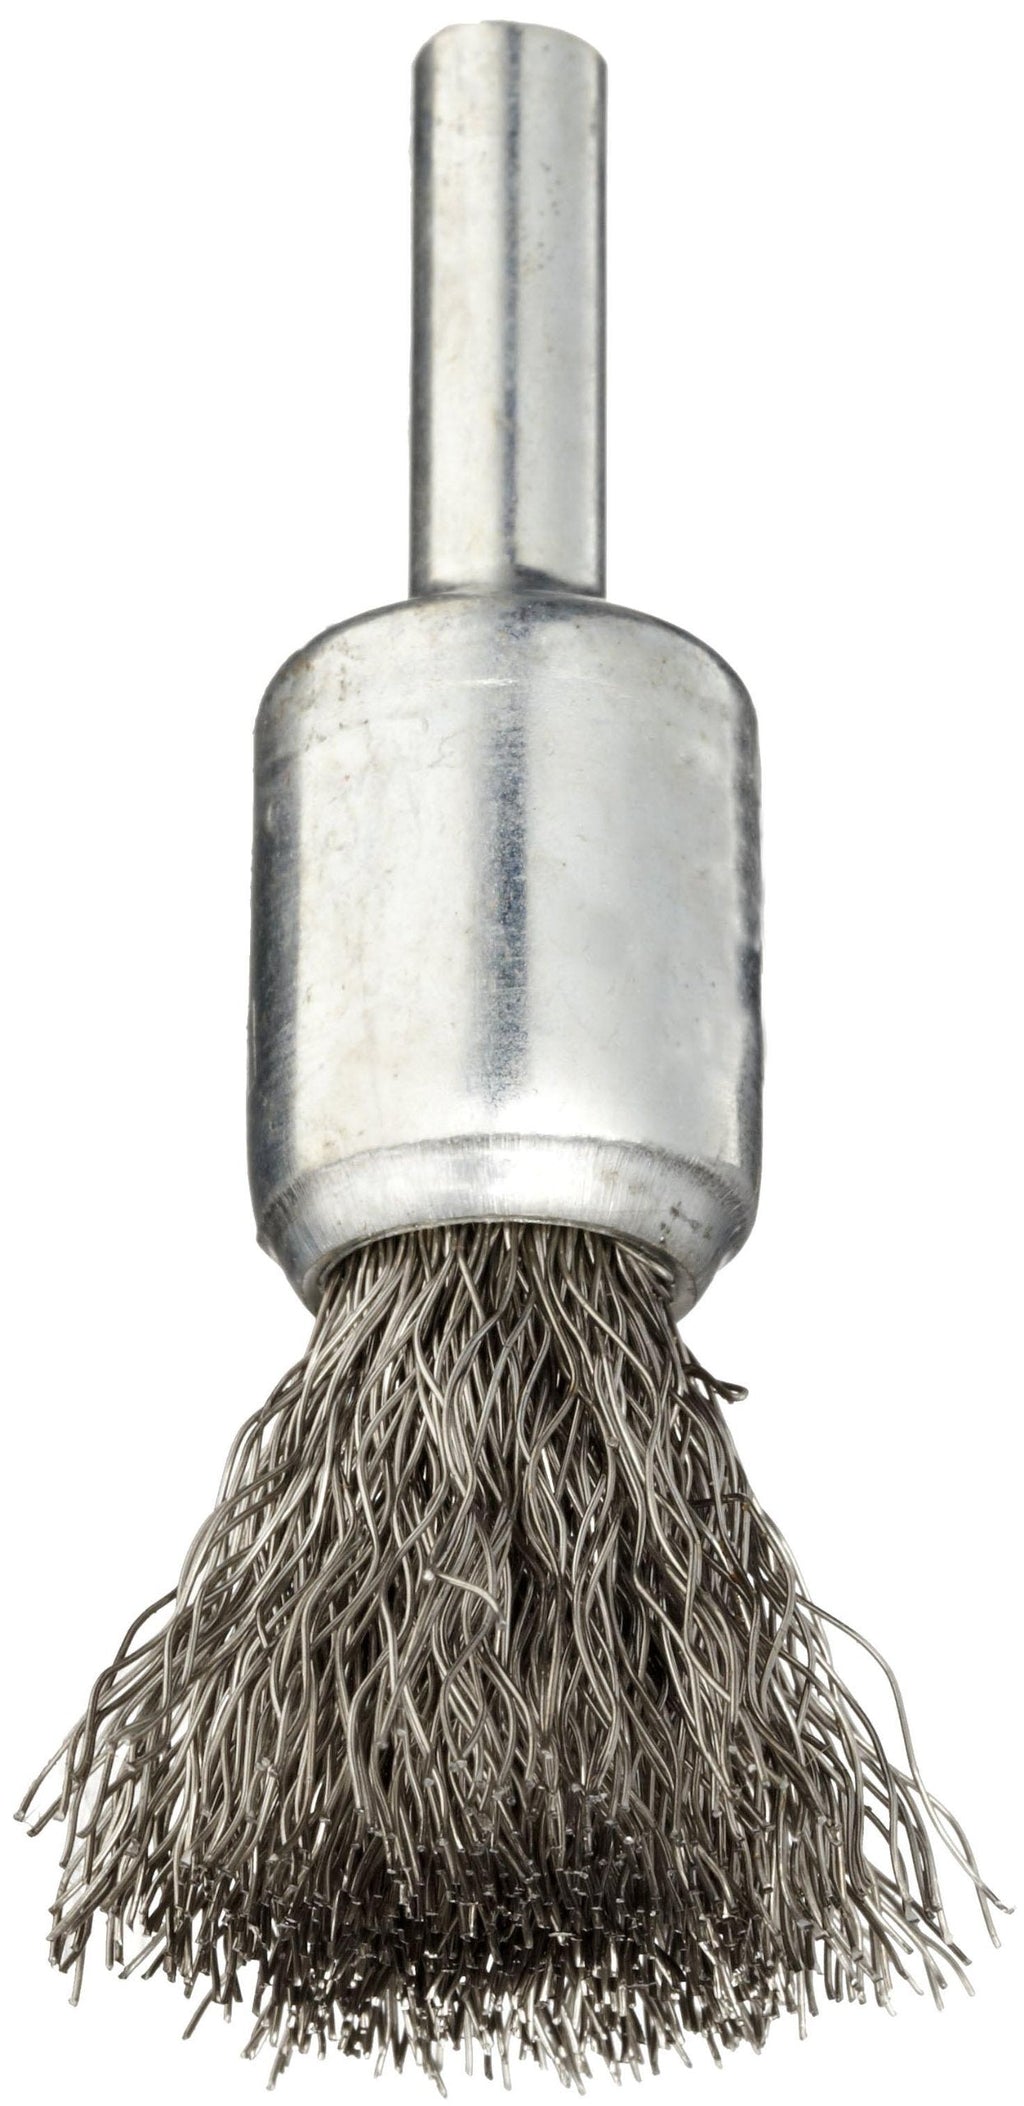  [AUSTRALIA] - Weiler 10014 1/2" Crimped Wire End Brush, .0104" Stainless Steel Fill, Made in the USA 0.0104" Wire Fill